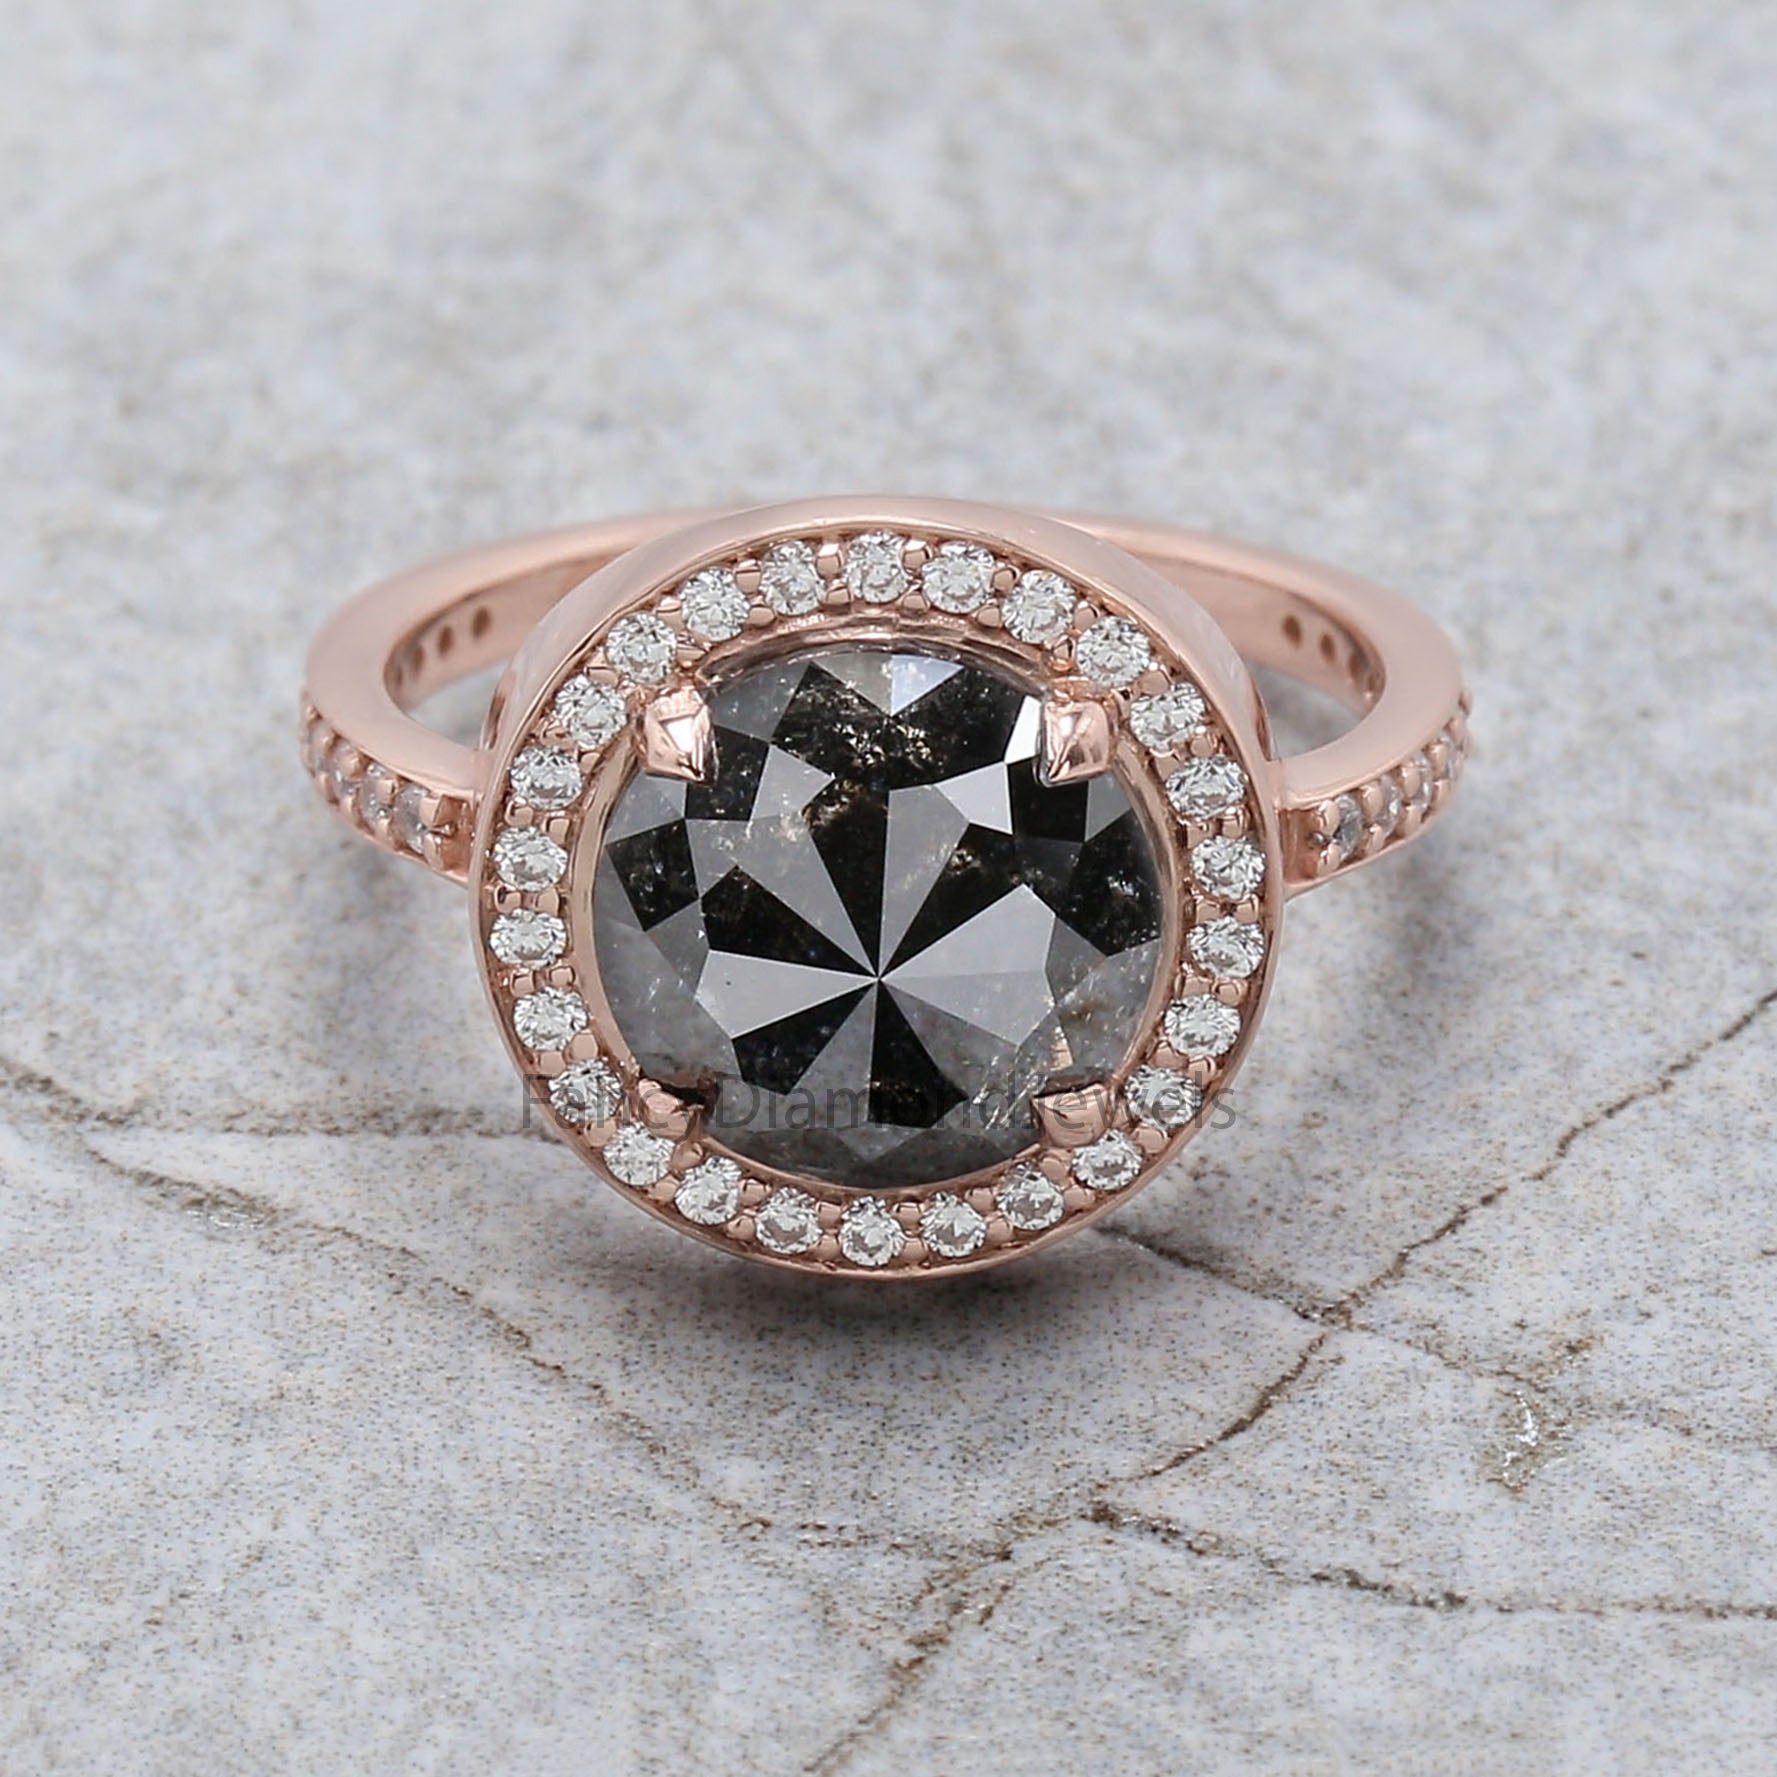 Round Rose Cut Salt And Pepper Diamond Ring 3.60 Ct 9.29 MM Round Diamond Ring 14K Rose Gold Silver Engagement Ring Gift For Her QL2130